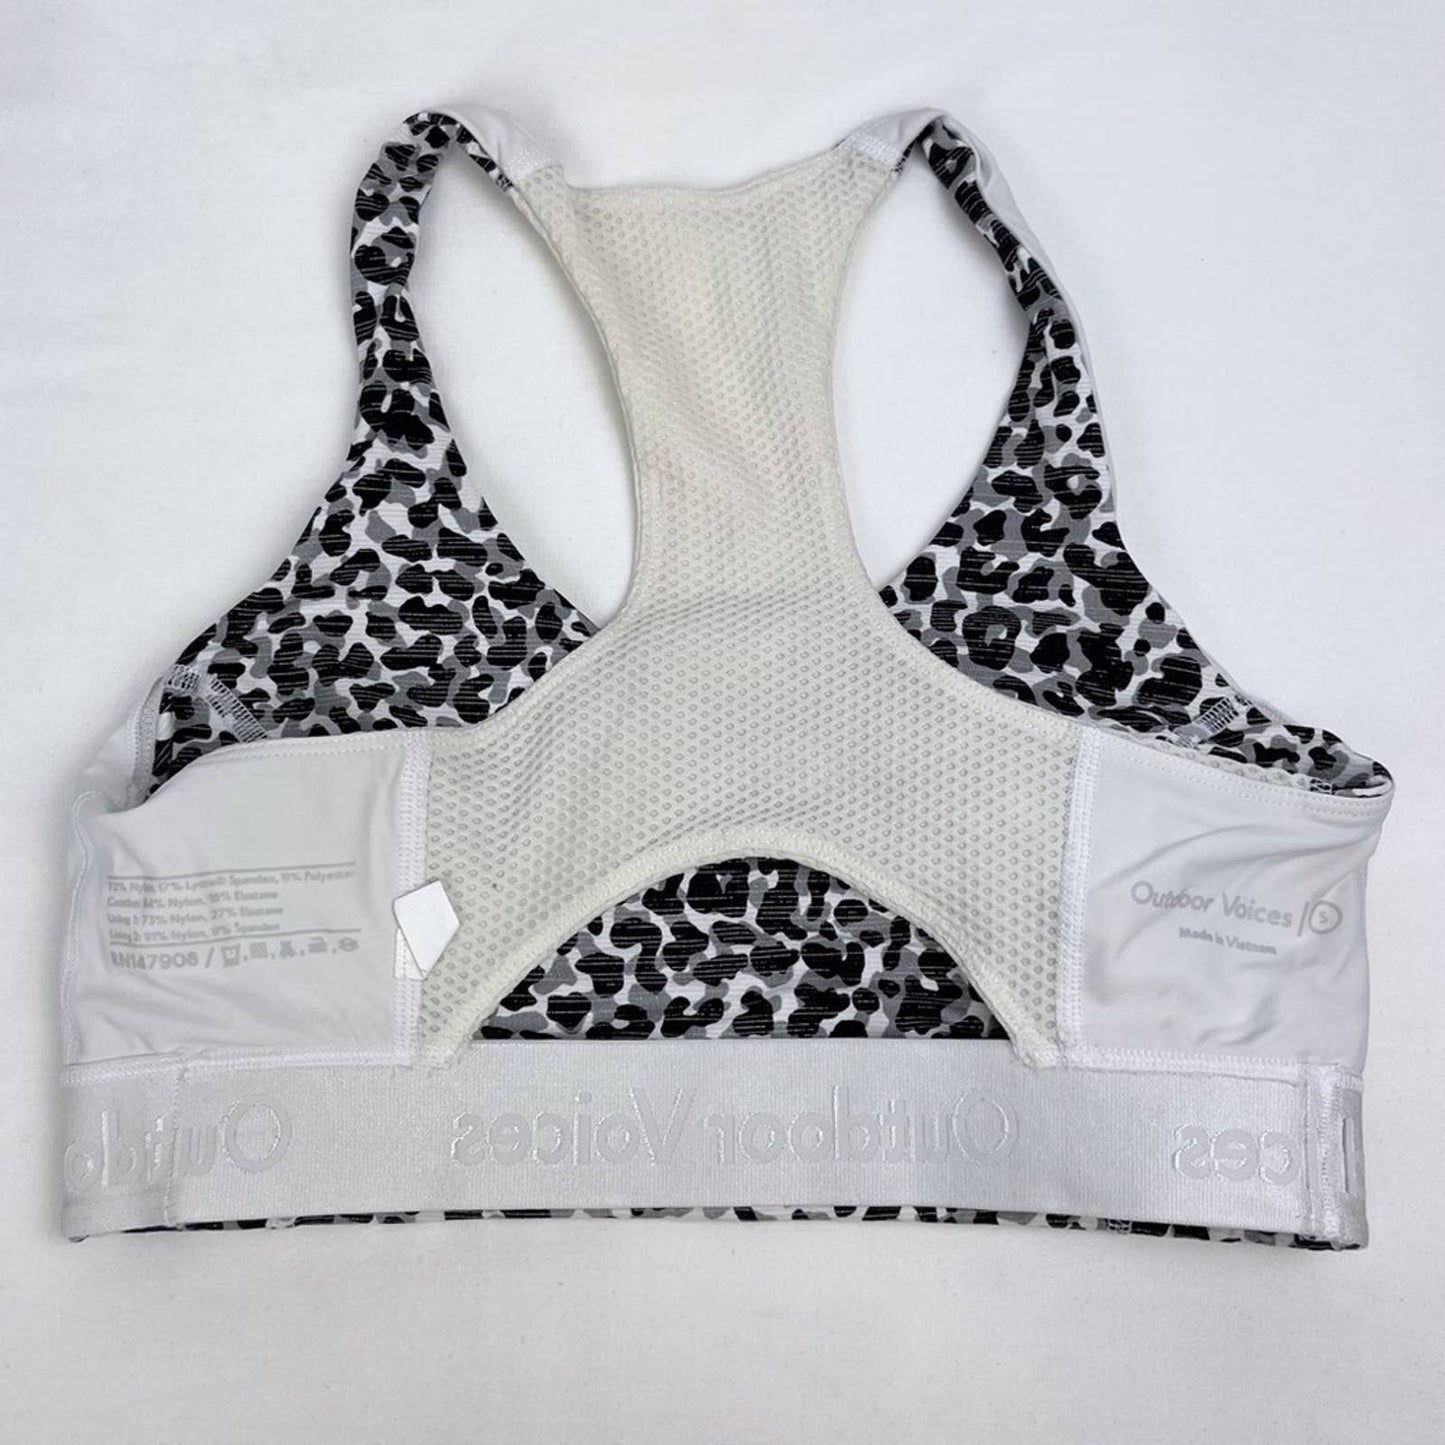 Outdoor Voices Doing Things Sports Bra Snow Leopard Animal Print Athletic Top Size S